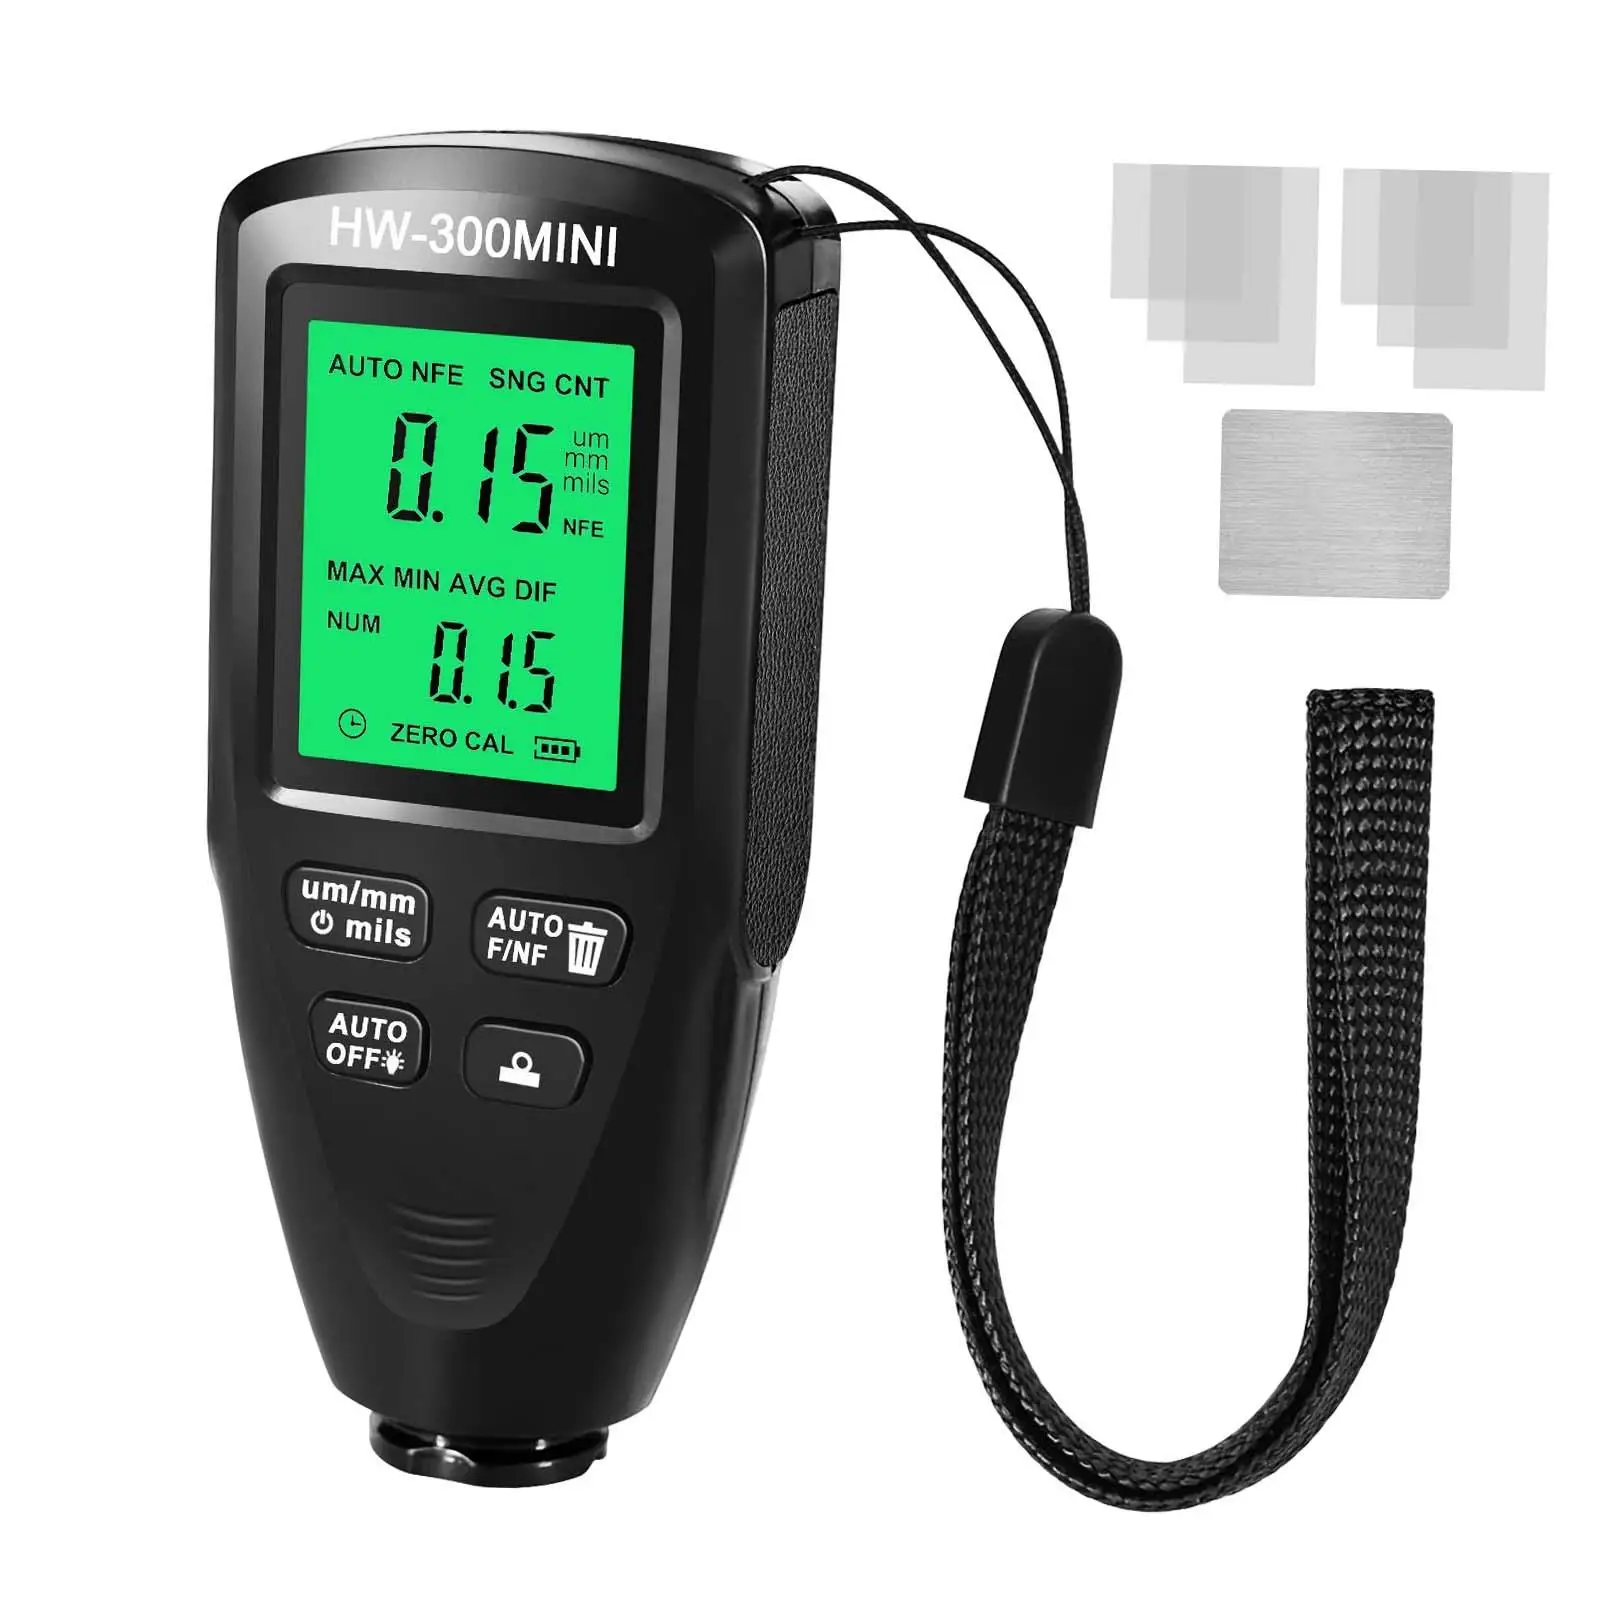 Car Coating Thickness Meter 0-2000Um Paint Thickness Gauge Painting Depth Gauge for Iron and Aluminium Bodies Workshops